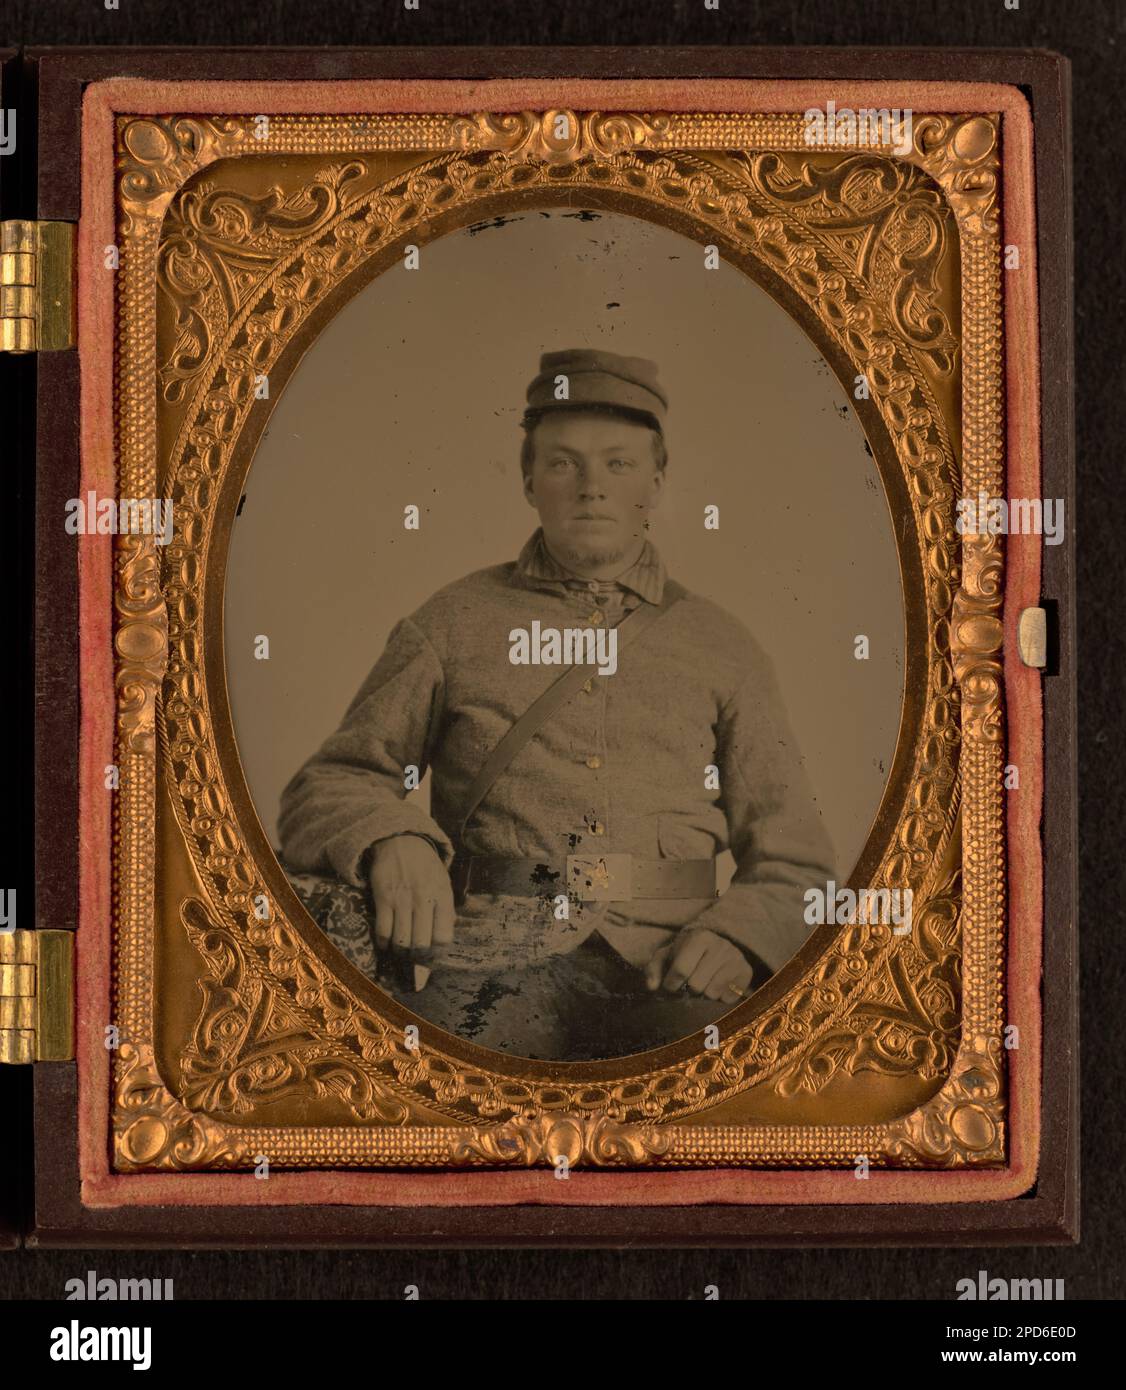 Unidentified soldier in Confederate uniform with star belt plate. Liljenquist Family Collection of Civil War Photographs , FAmbrotype/Tintype photograph filing series , pp/liljconfed. Confederate States of America, Army, People, 1860-1870, Soldiers, Confederate, 1860-1870, Military uniforms, Confederate, 1860-1870, United States, History, Civil War, 1861-1865, Military personnel, Confederate. Stock Photo